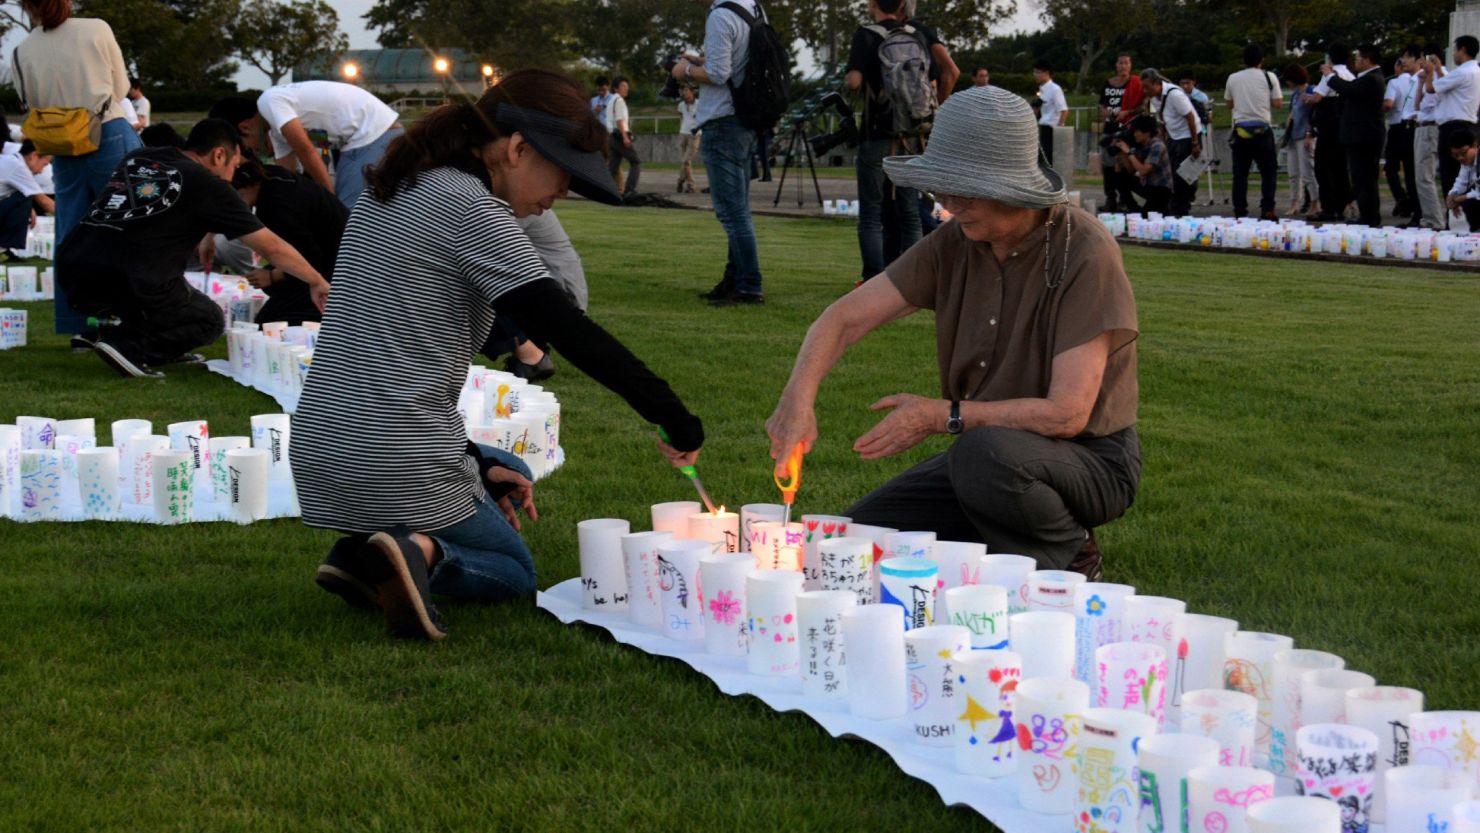 This picture taken on Friday, September 4, 2015, shows people lighting candles to celebrate at Naraha town in Fukushima as the Japanese government lifts an evacuation order to Naraha near the crippled nuclear plant, after a clean-up program has lowered radiation levels in the area. Among communities where the entire population was forced to evacuate after the nuclear crisis started in March 2011, Naraha is the first town to allow all of its residents to return home permanently.